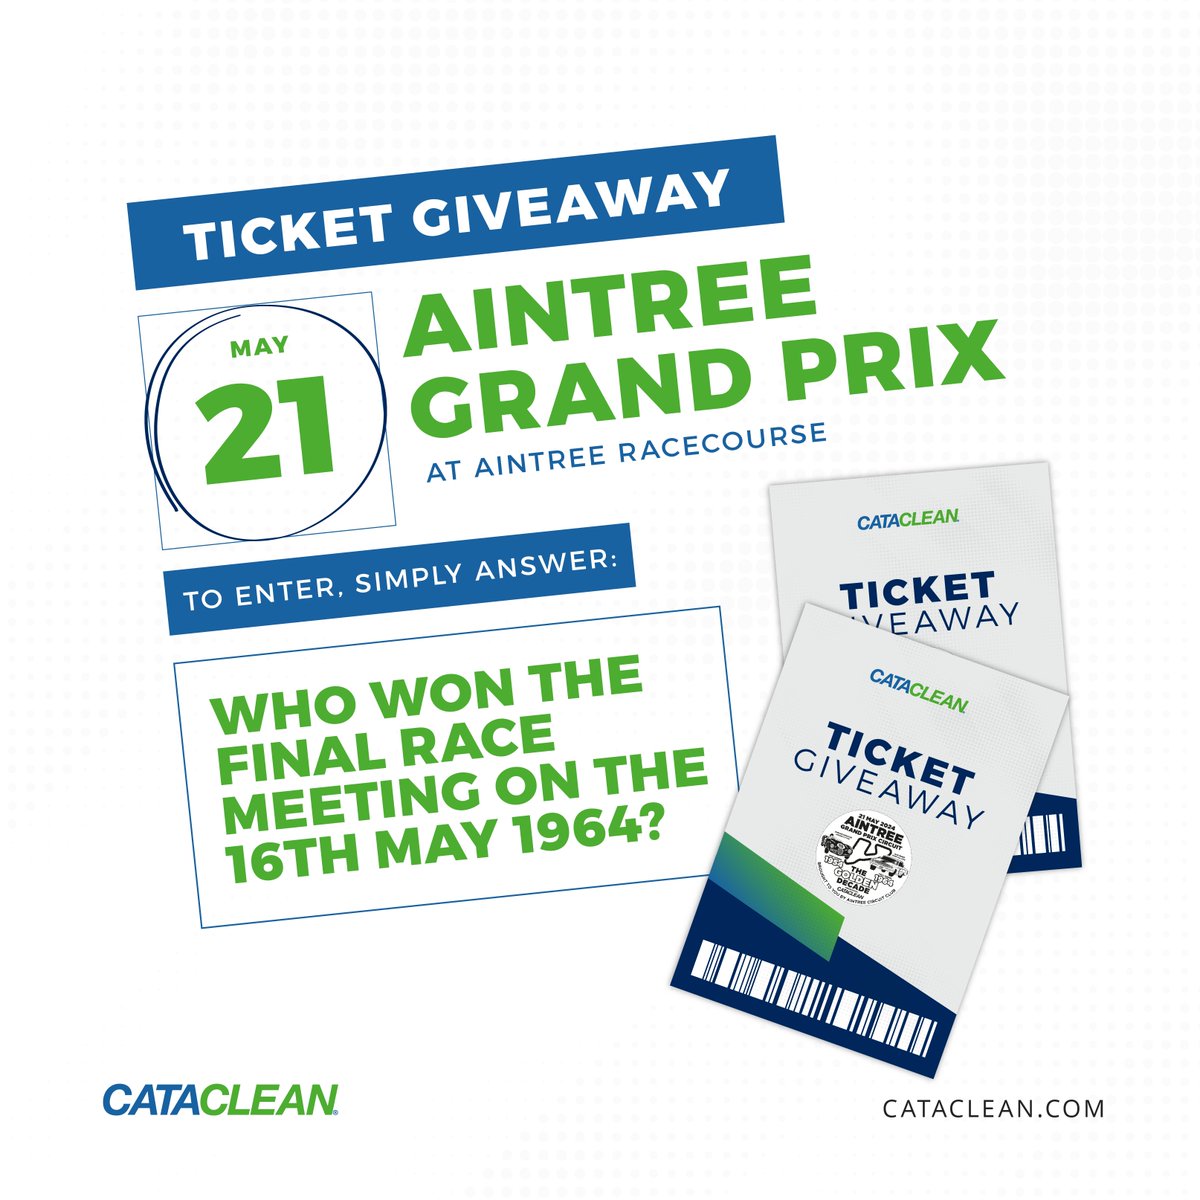 #WIN 2 #tickets to the ‘The Golden Decade’ event To enter, simply answer: Who won the final race meeting on the 16th of May 1964? 🏎️ THE GOLDEN DECADE 1954 - 1964 Display, Luncheon, and Drive on the Historic Grand Prix Circuit Announced on 17th May #cataclean #grandprix